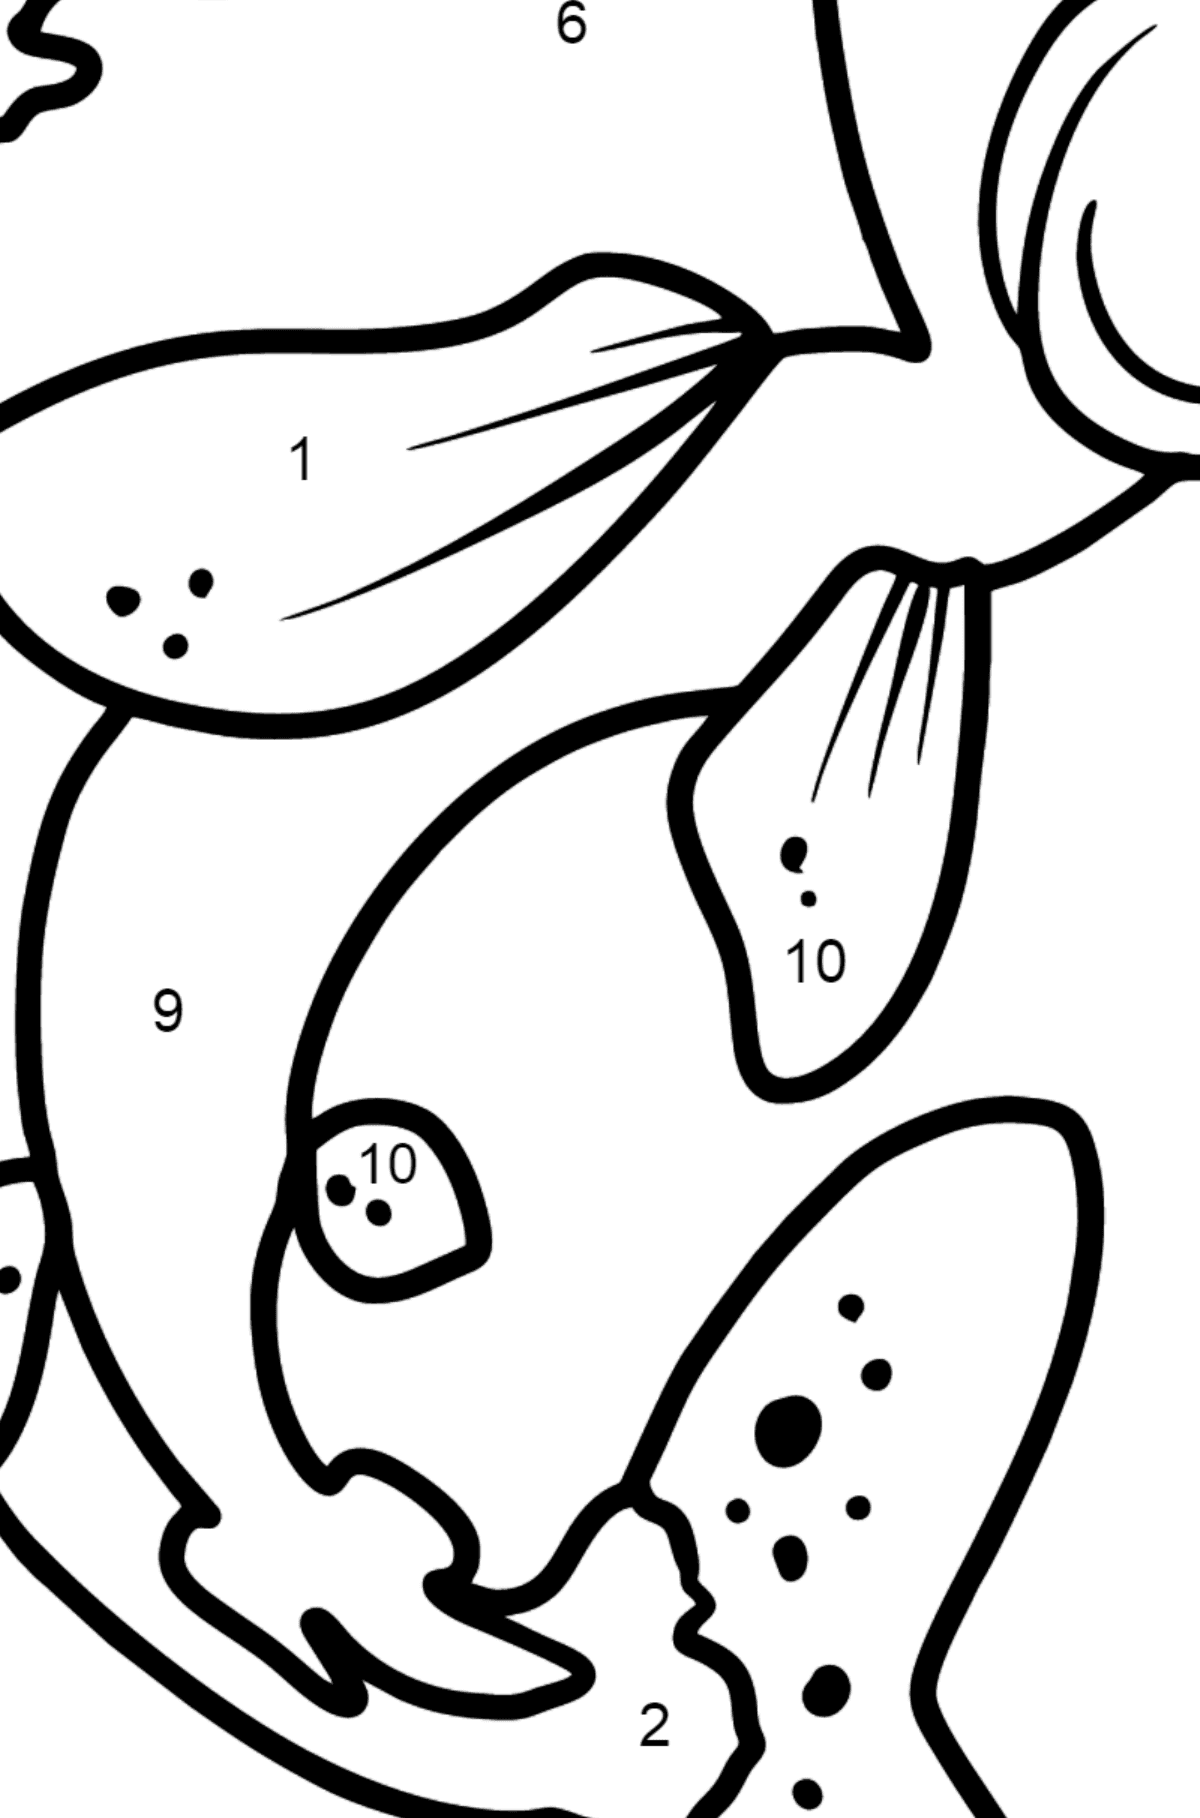 Salmon coloring page - Coloring by Numbers for Kids